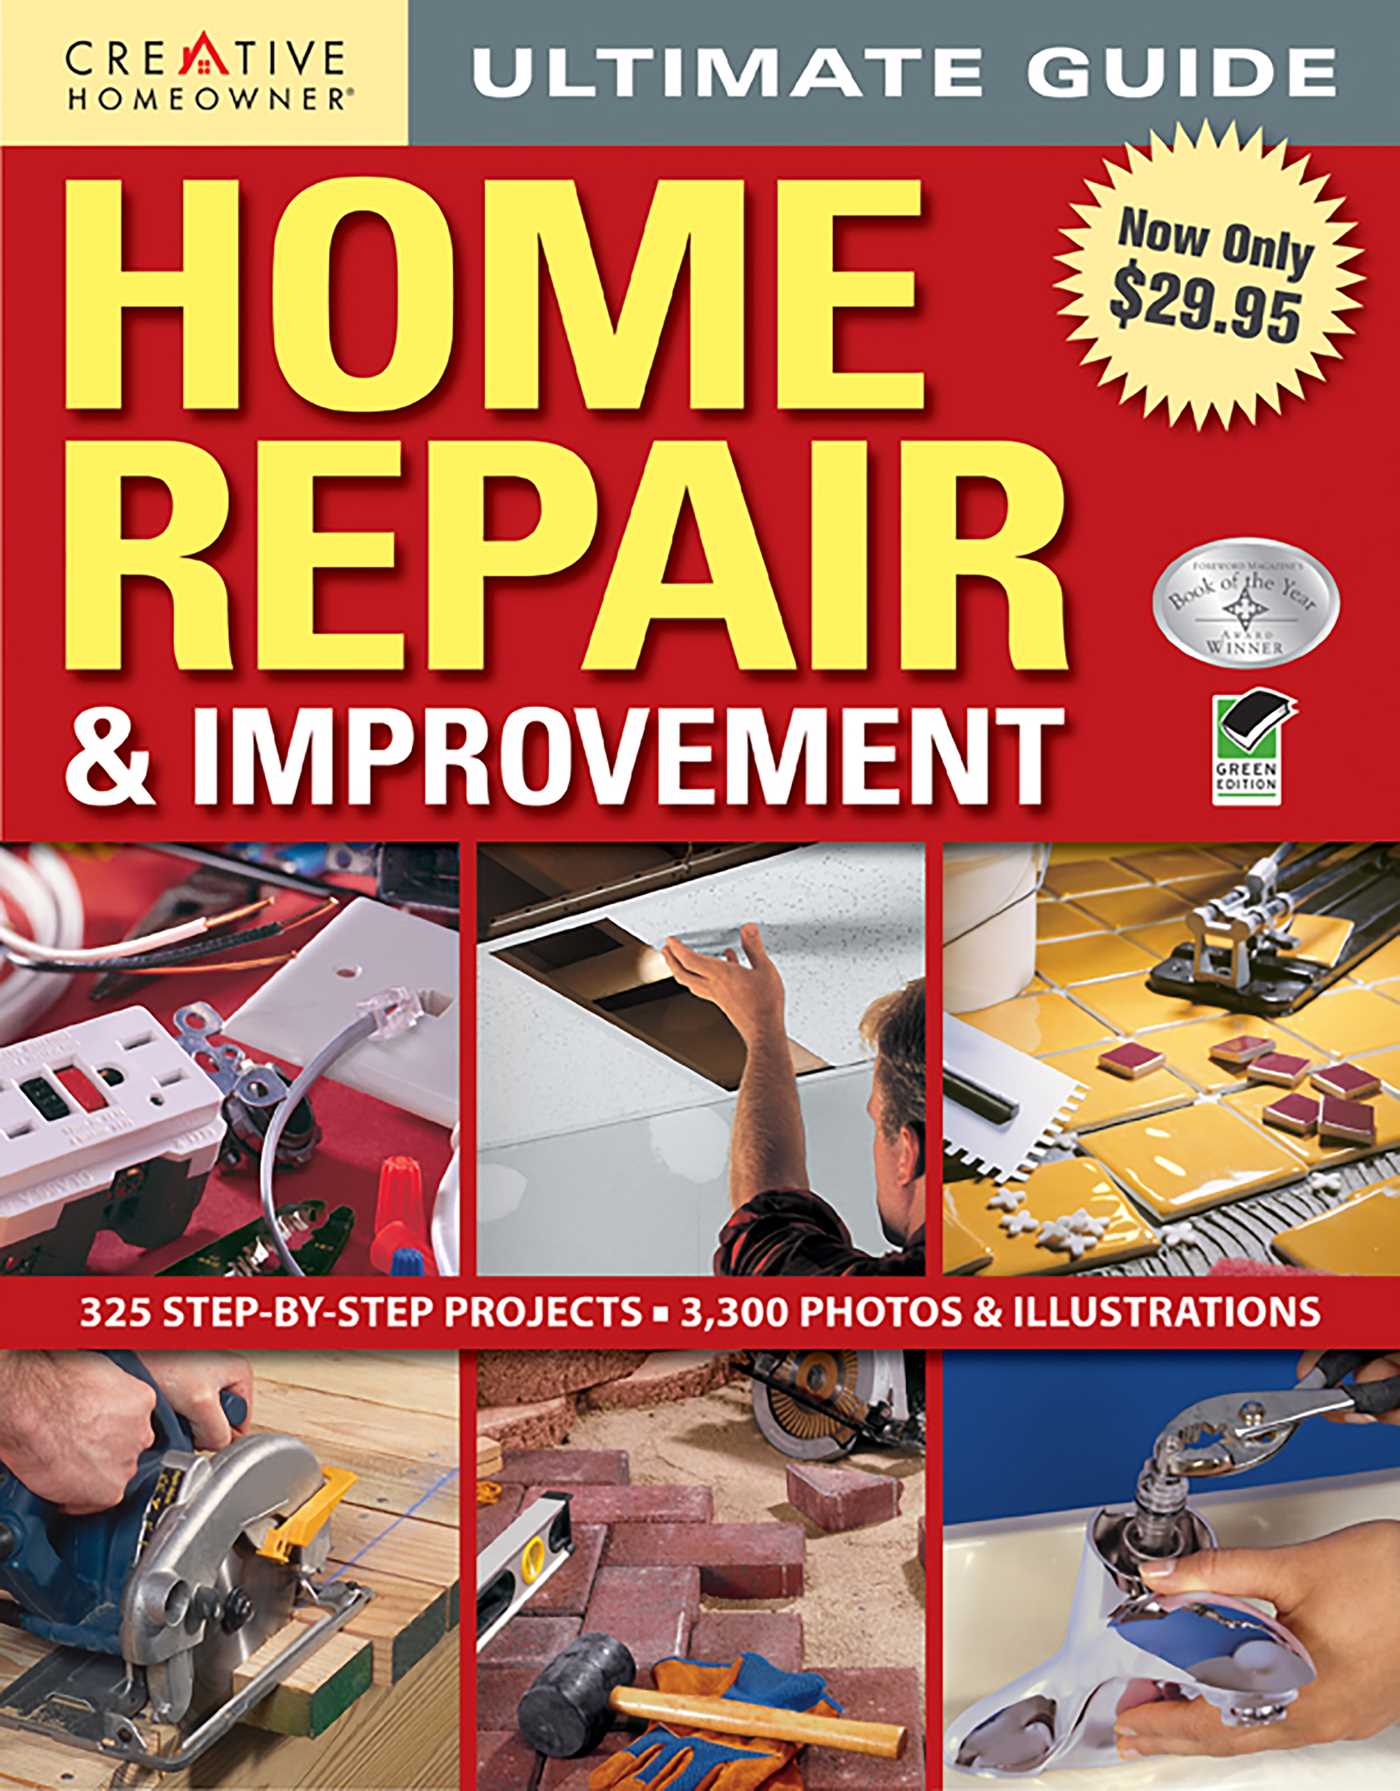 How to books for home construction and repair